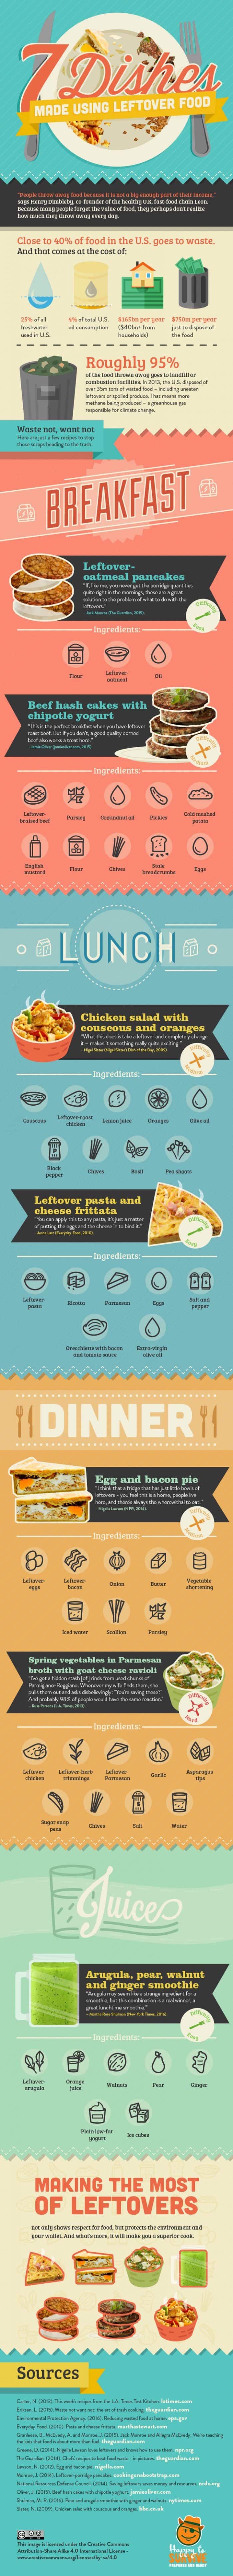 7 Delicious Recipes using Leftovers Infographic